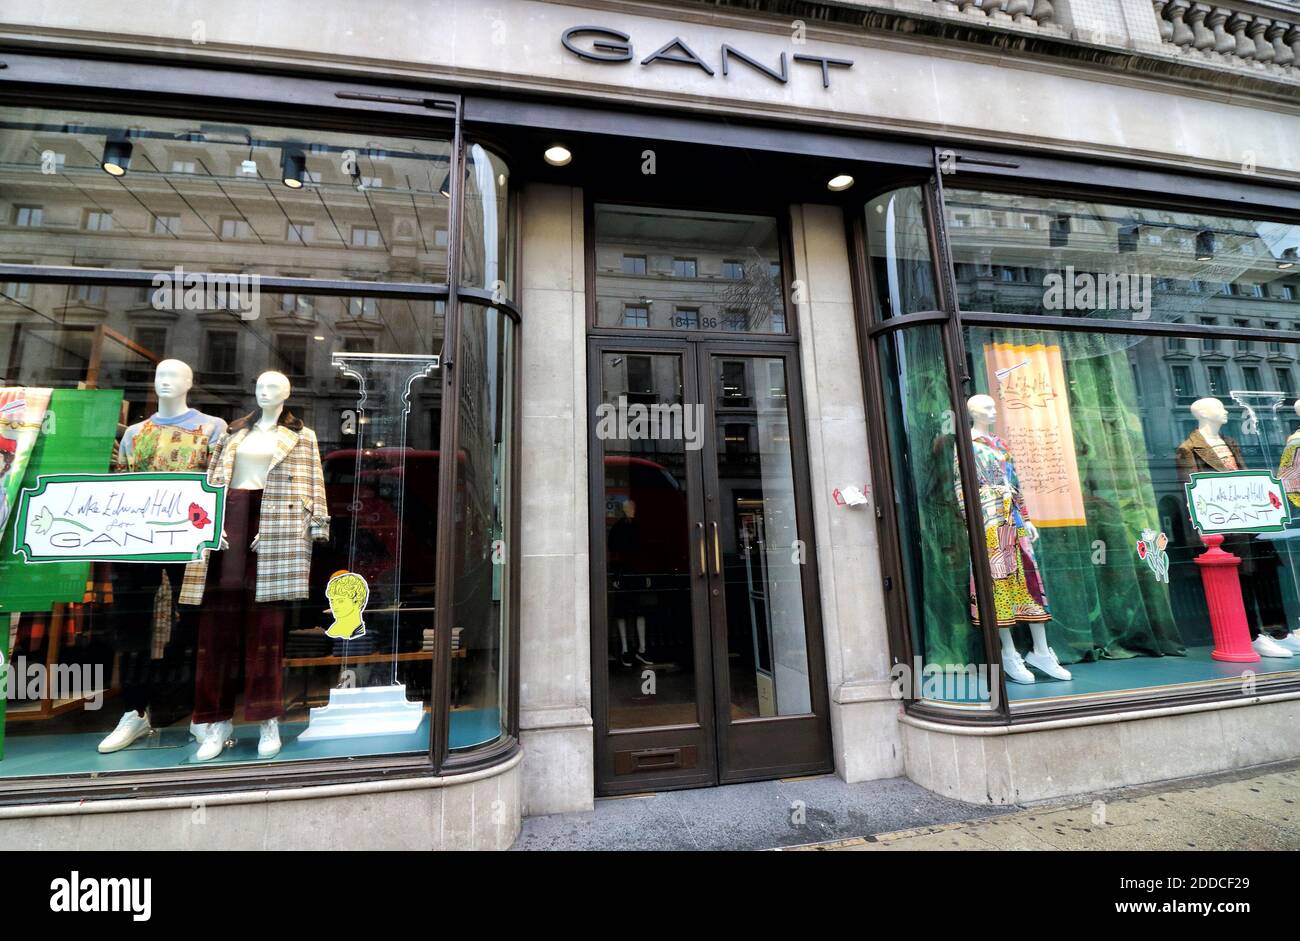 Gant Store High Resolution Stock Photography and Images - Alamy